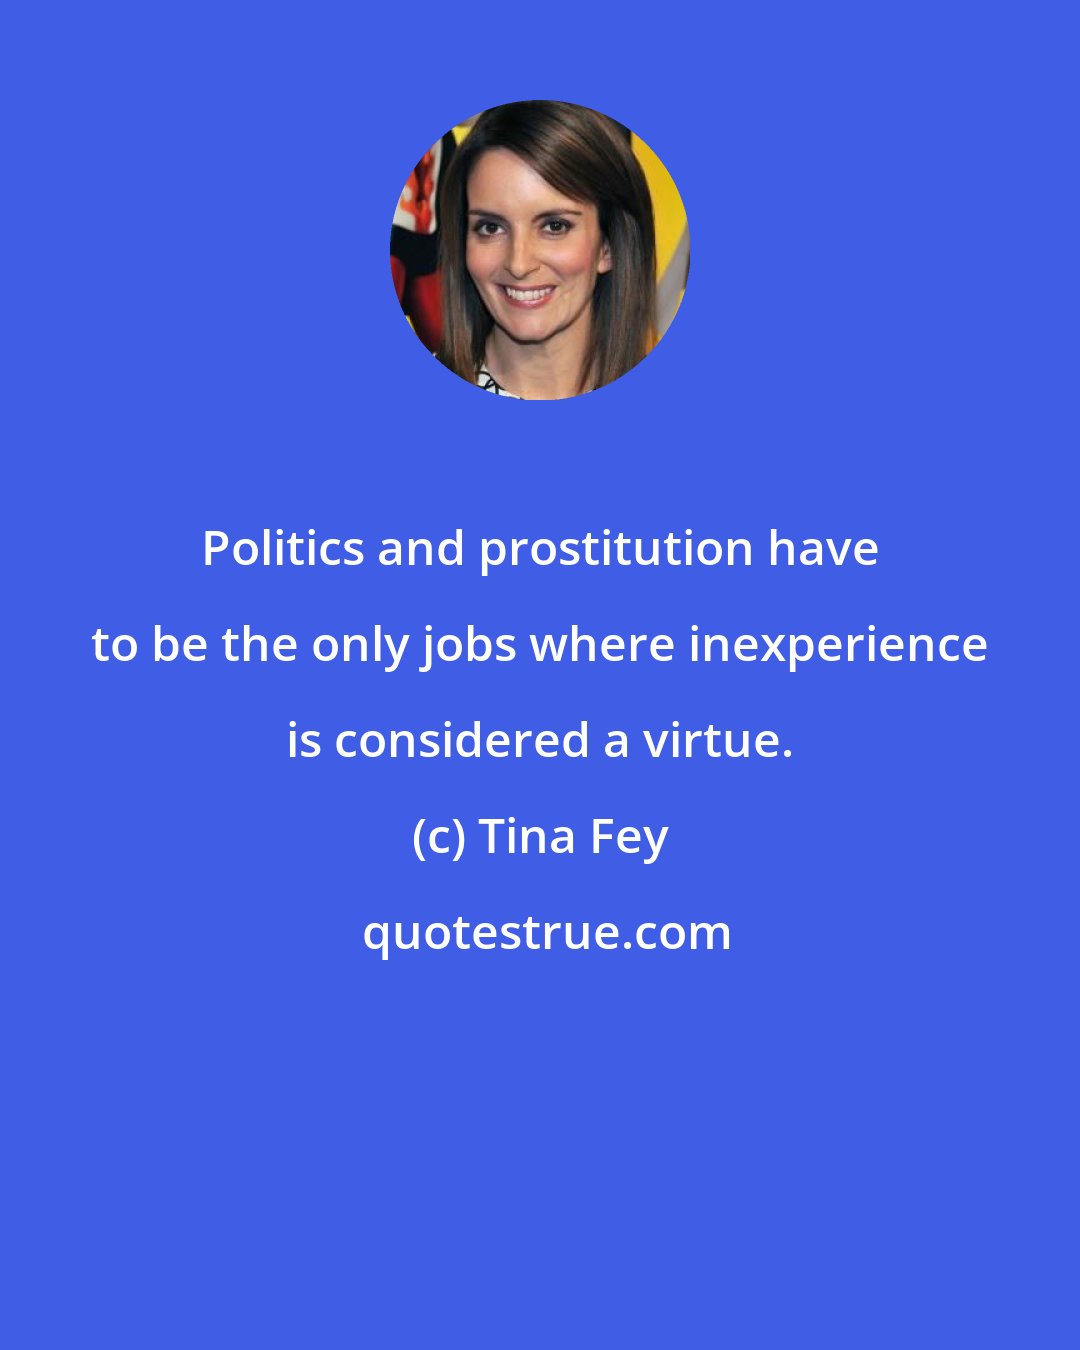 Tina Fey: Politics and prostitution have to be the only jobs where inexperience is considered a virtue.